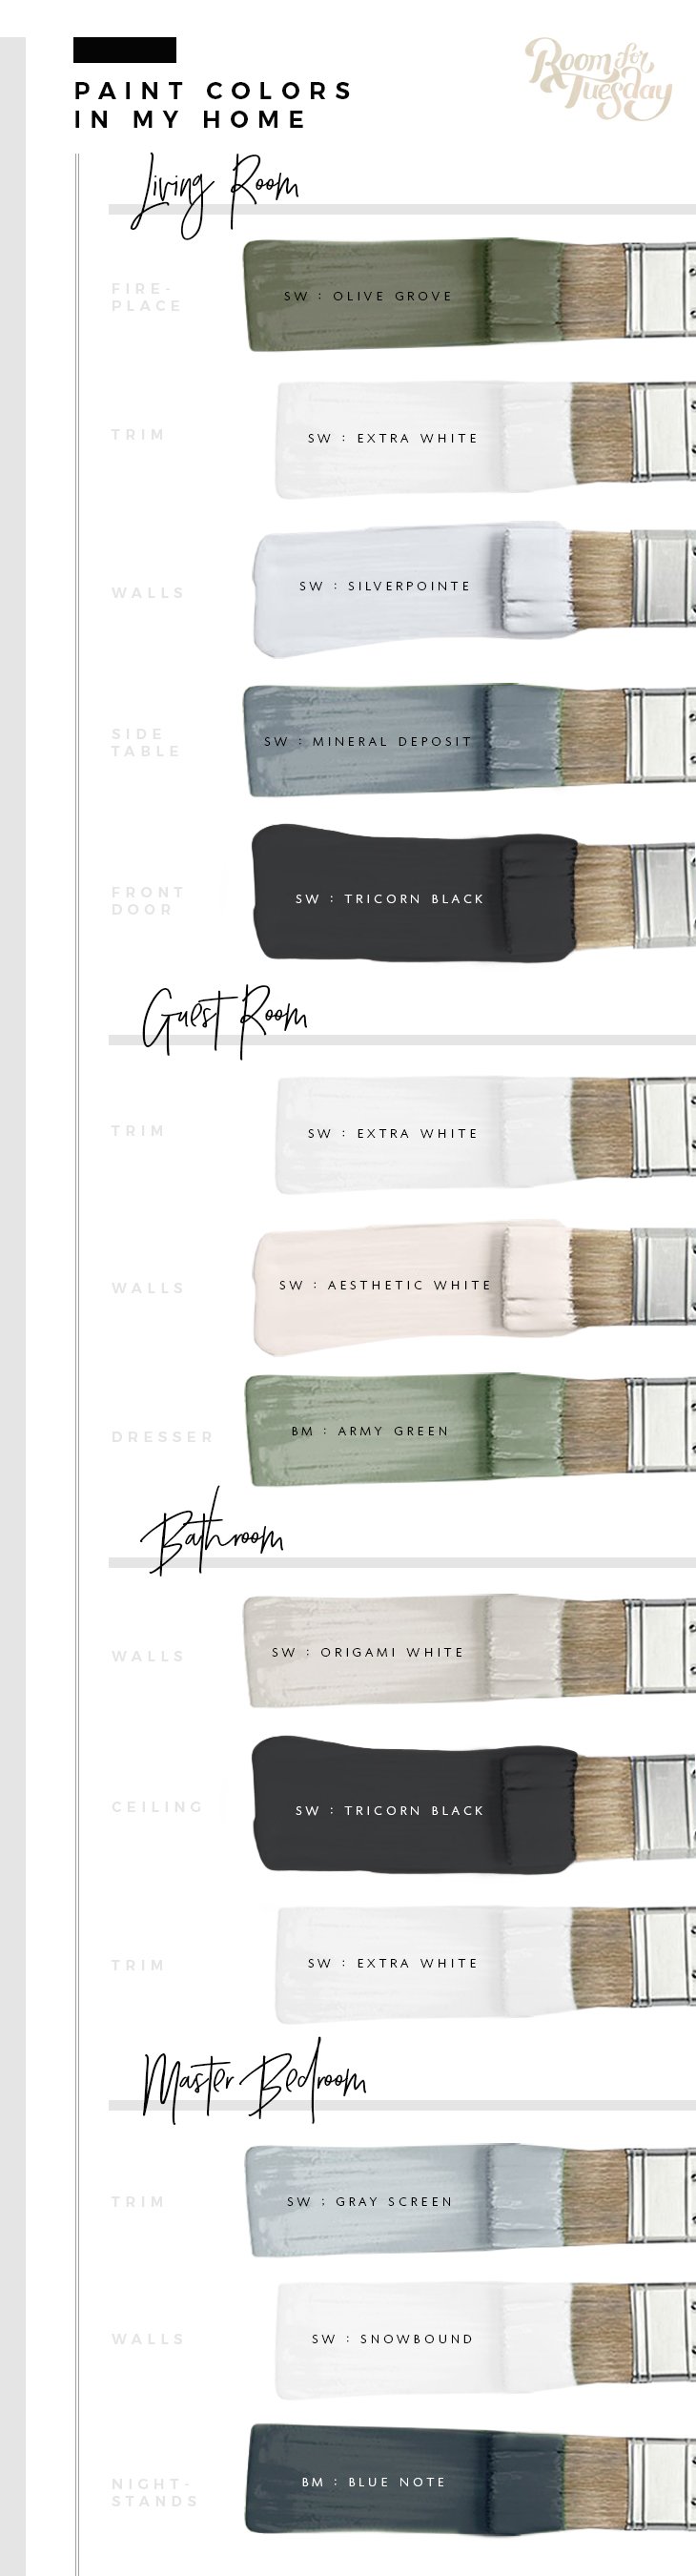 Predicted Paint Colors for 2018 - roomfortuesday.com